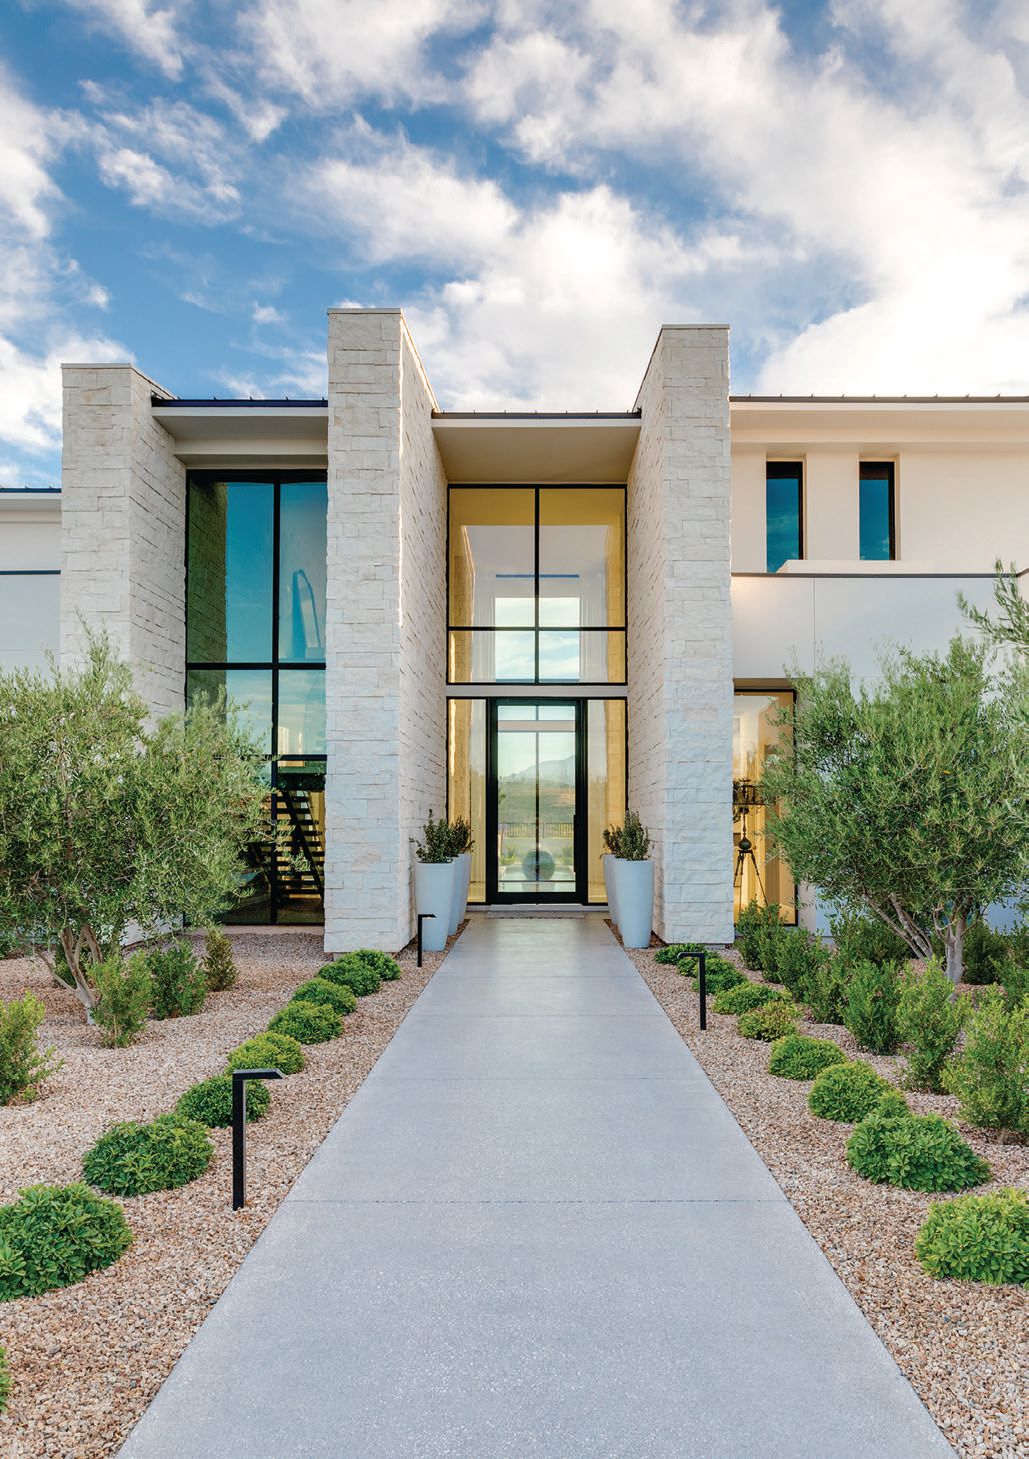 Palatial stone columns frame the home’s exquisite entryway PHOTO BY STETSON YBARRA